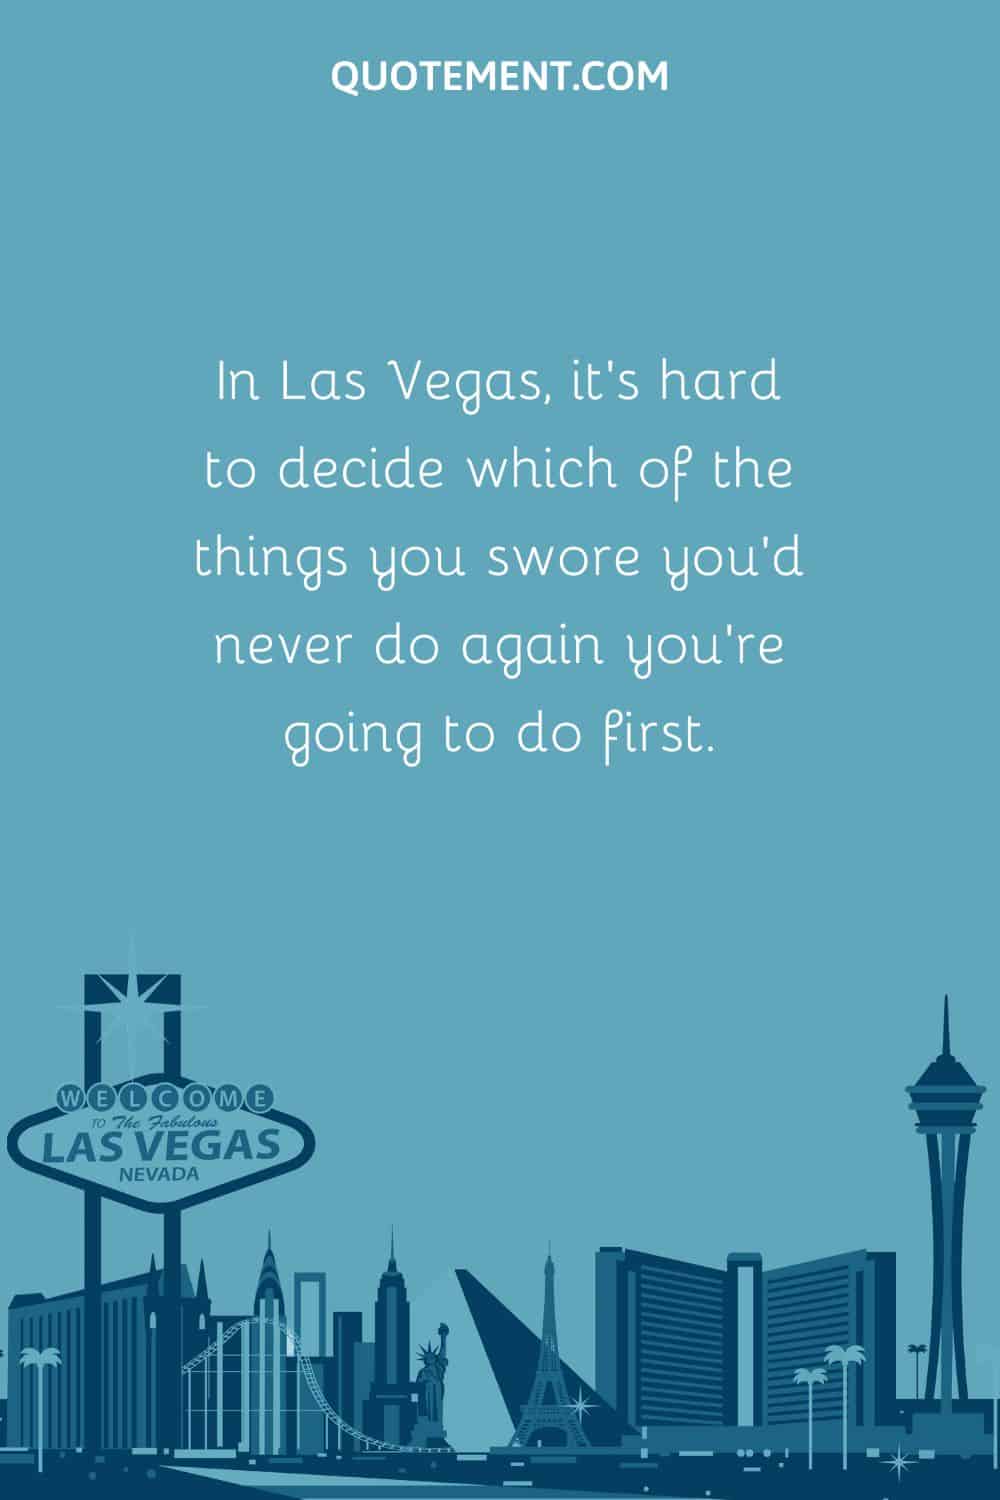 In Las Vegas, it’s hard to decide which of the things you swore you’d never do again you’re going to do first.